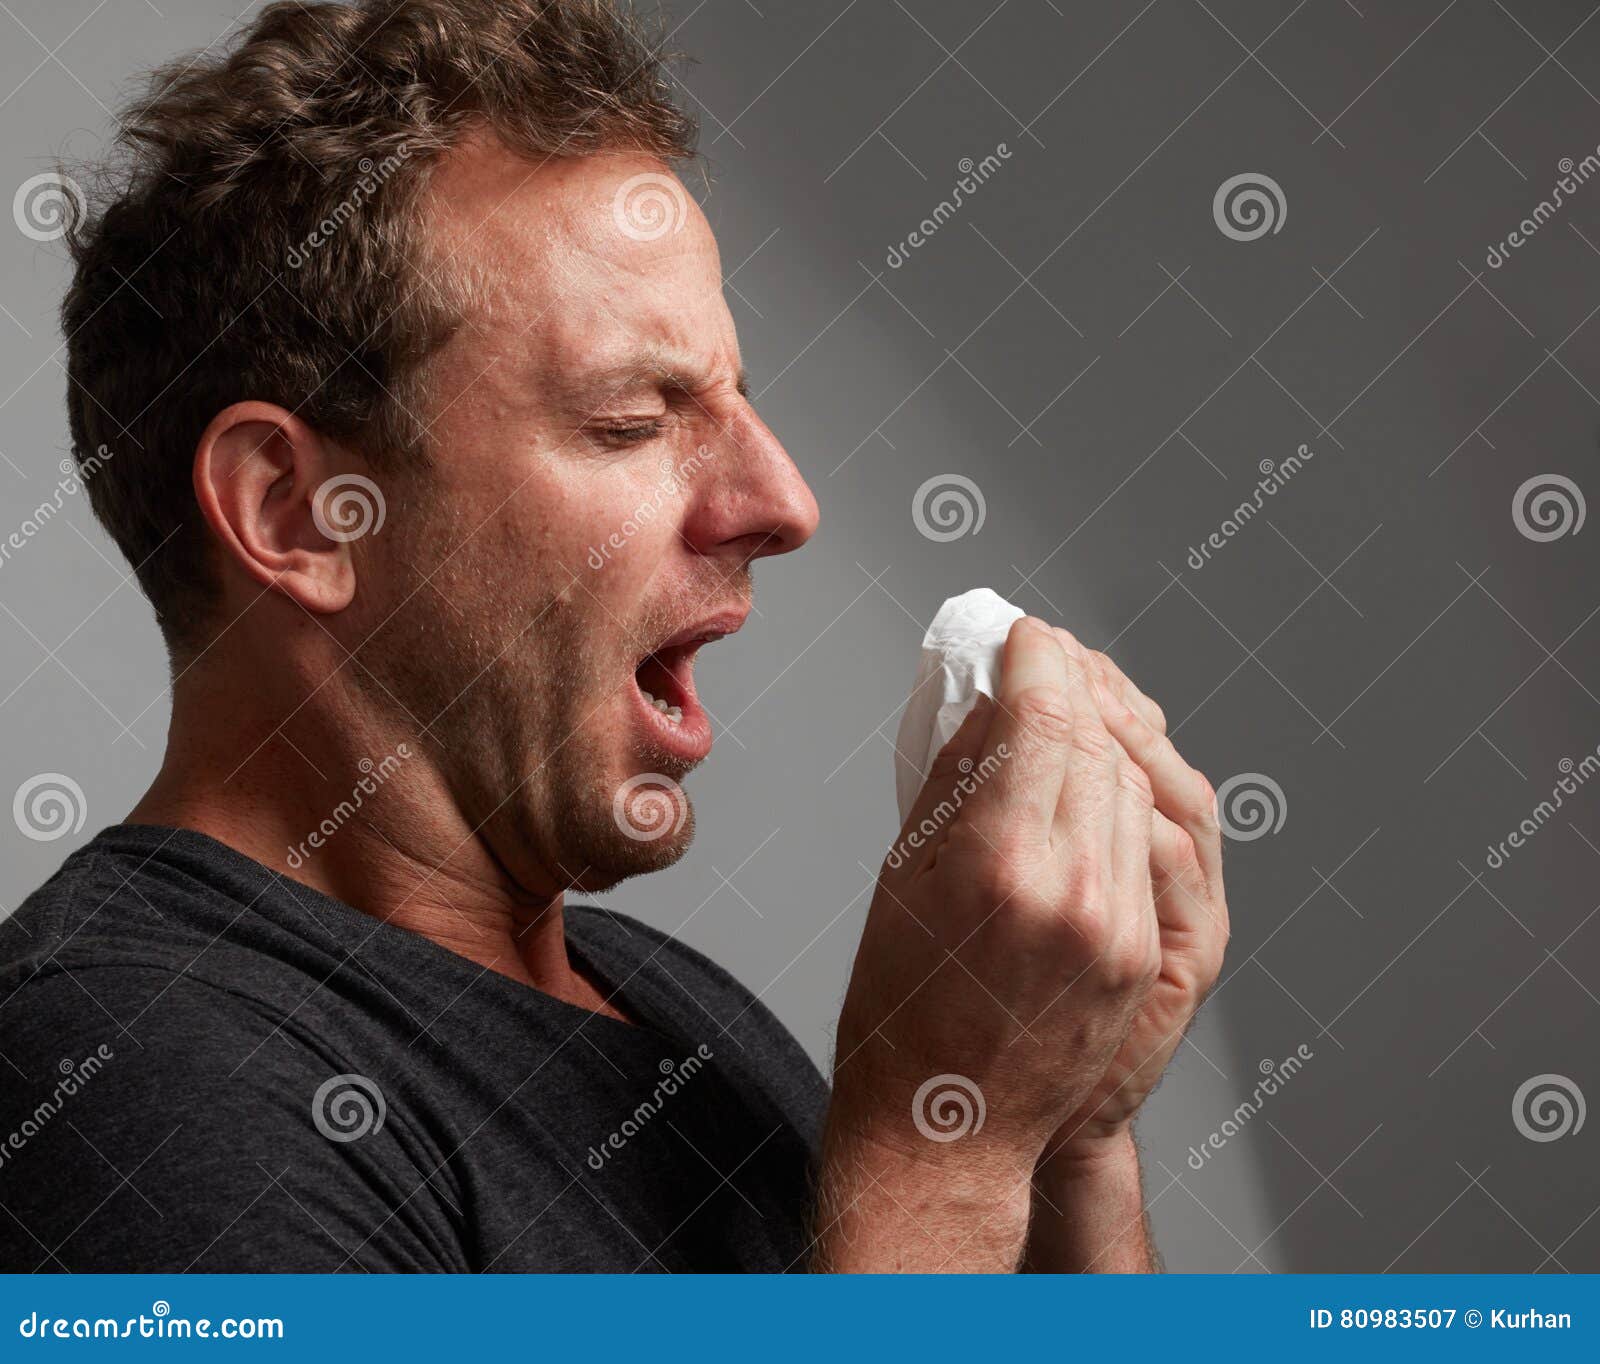 sneezing man with cold